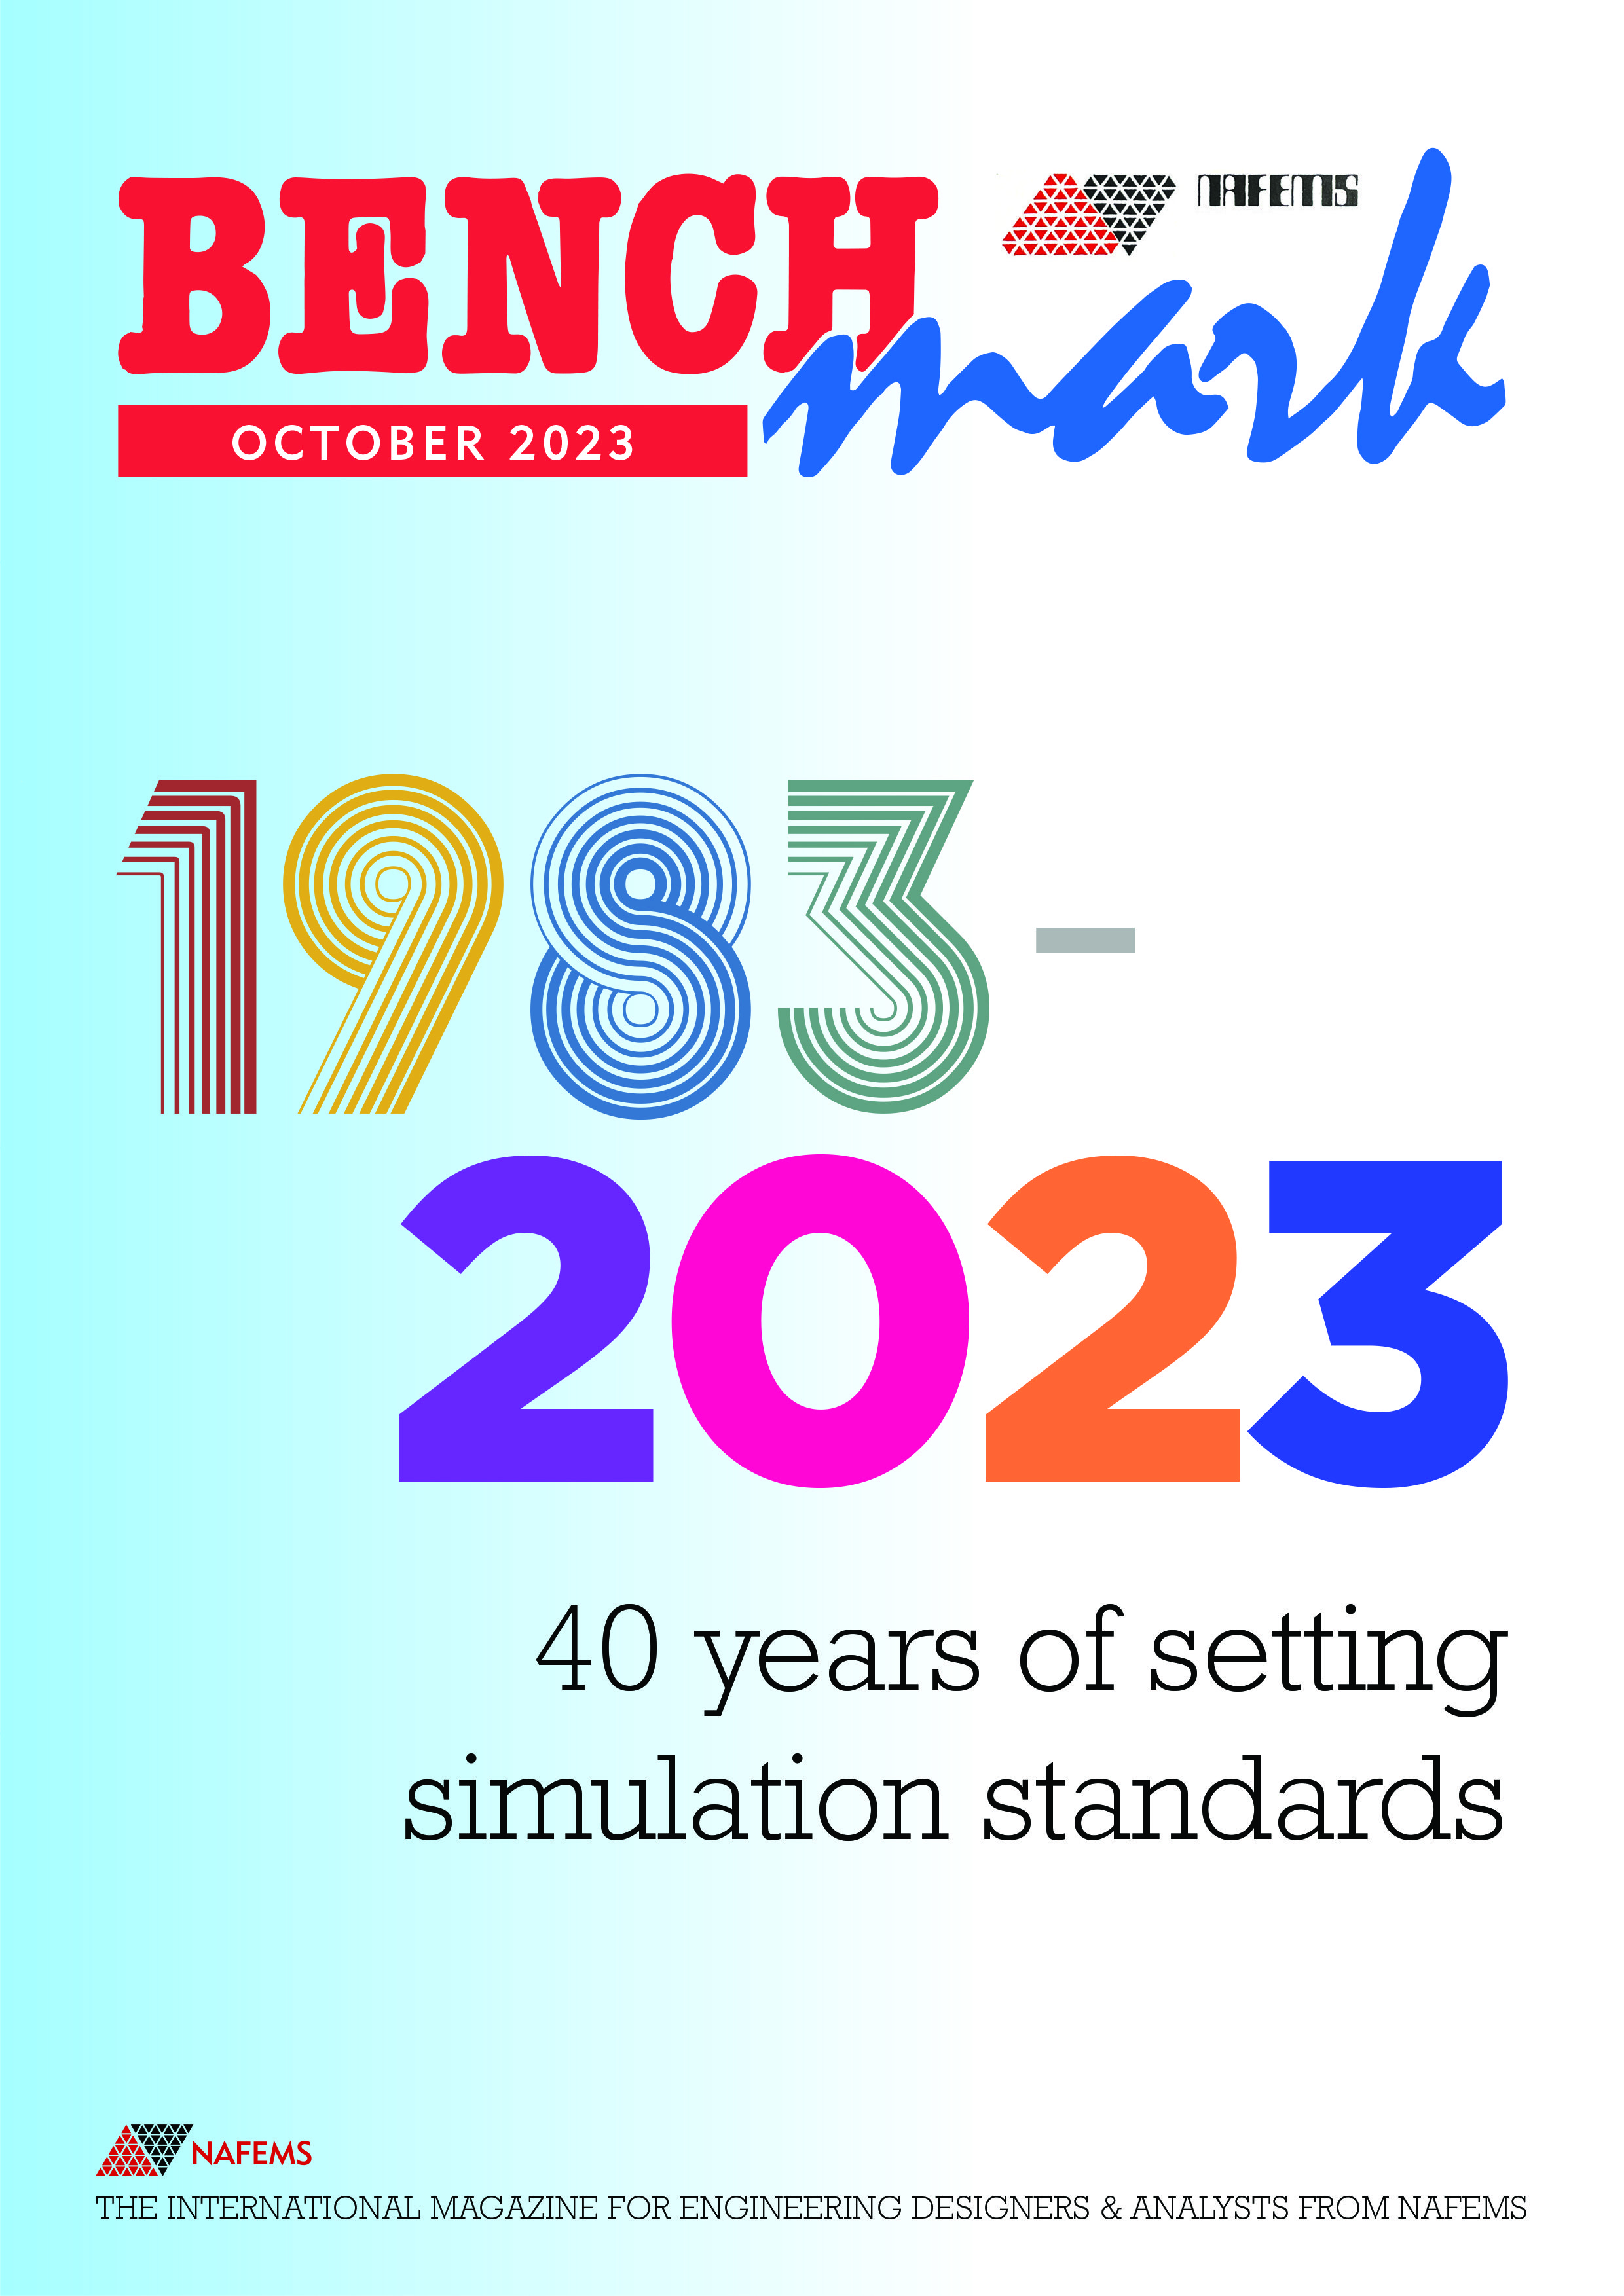 BENCHMARK October 2023 - 40 Years of Setting Simulation Standards